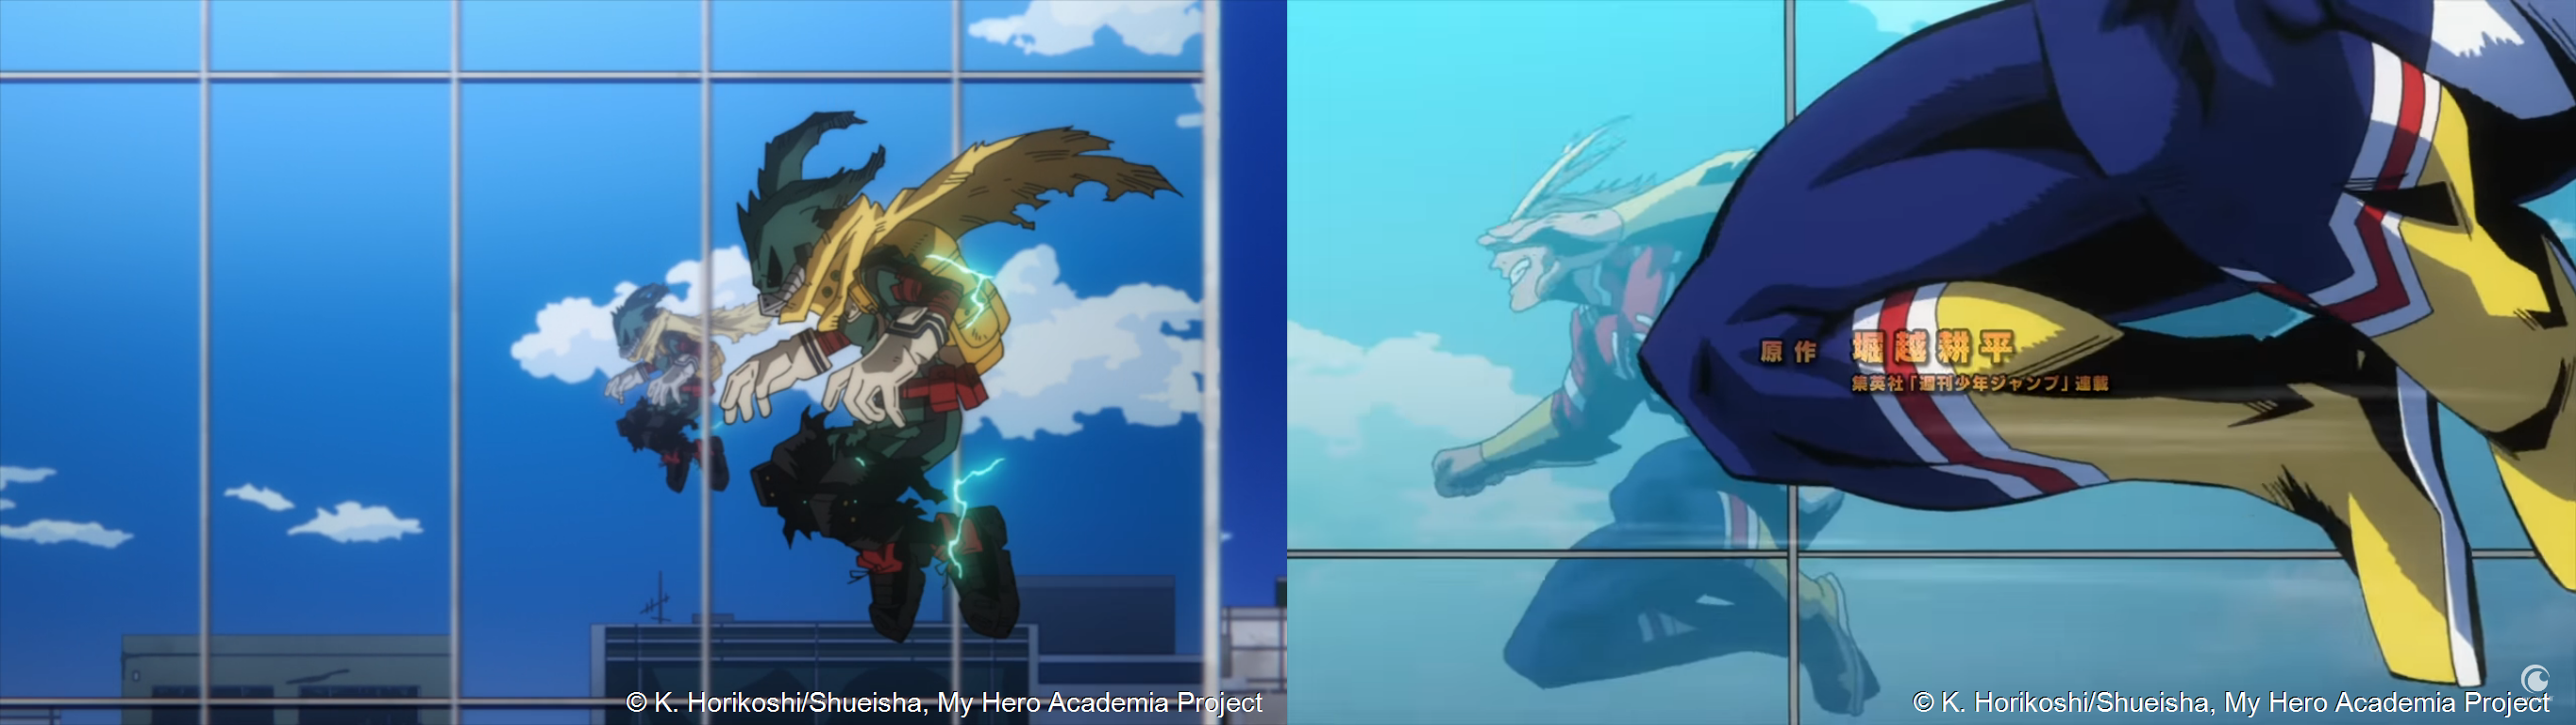 All For One VS One For All 😱 My Hero Academia 6 (Ep.10) 